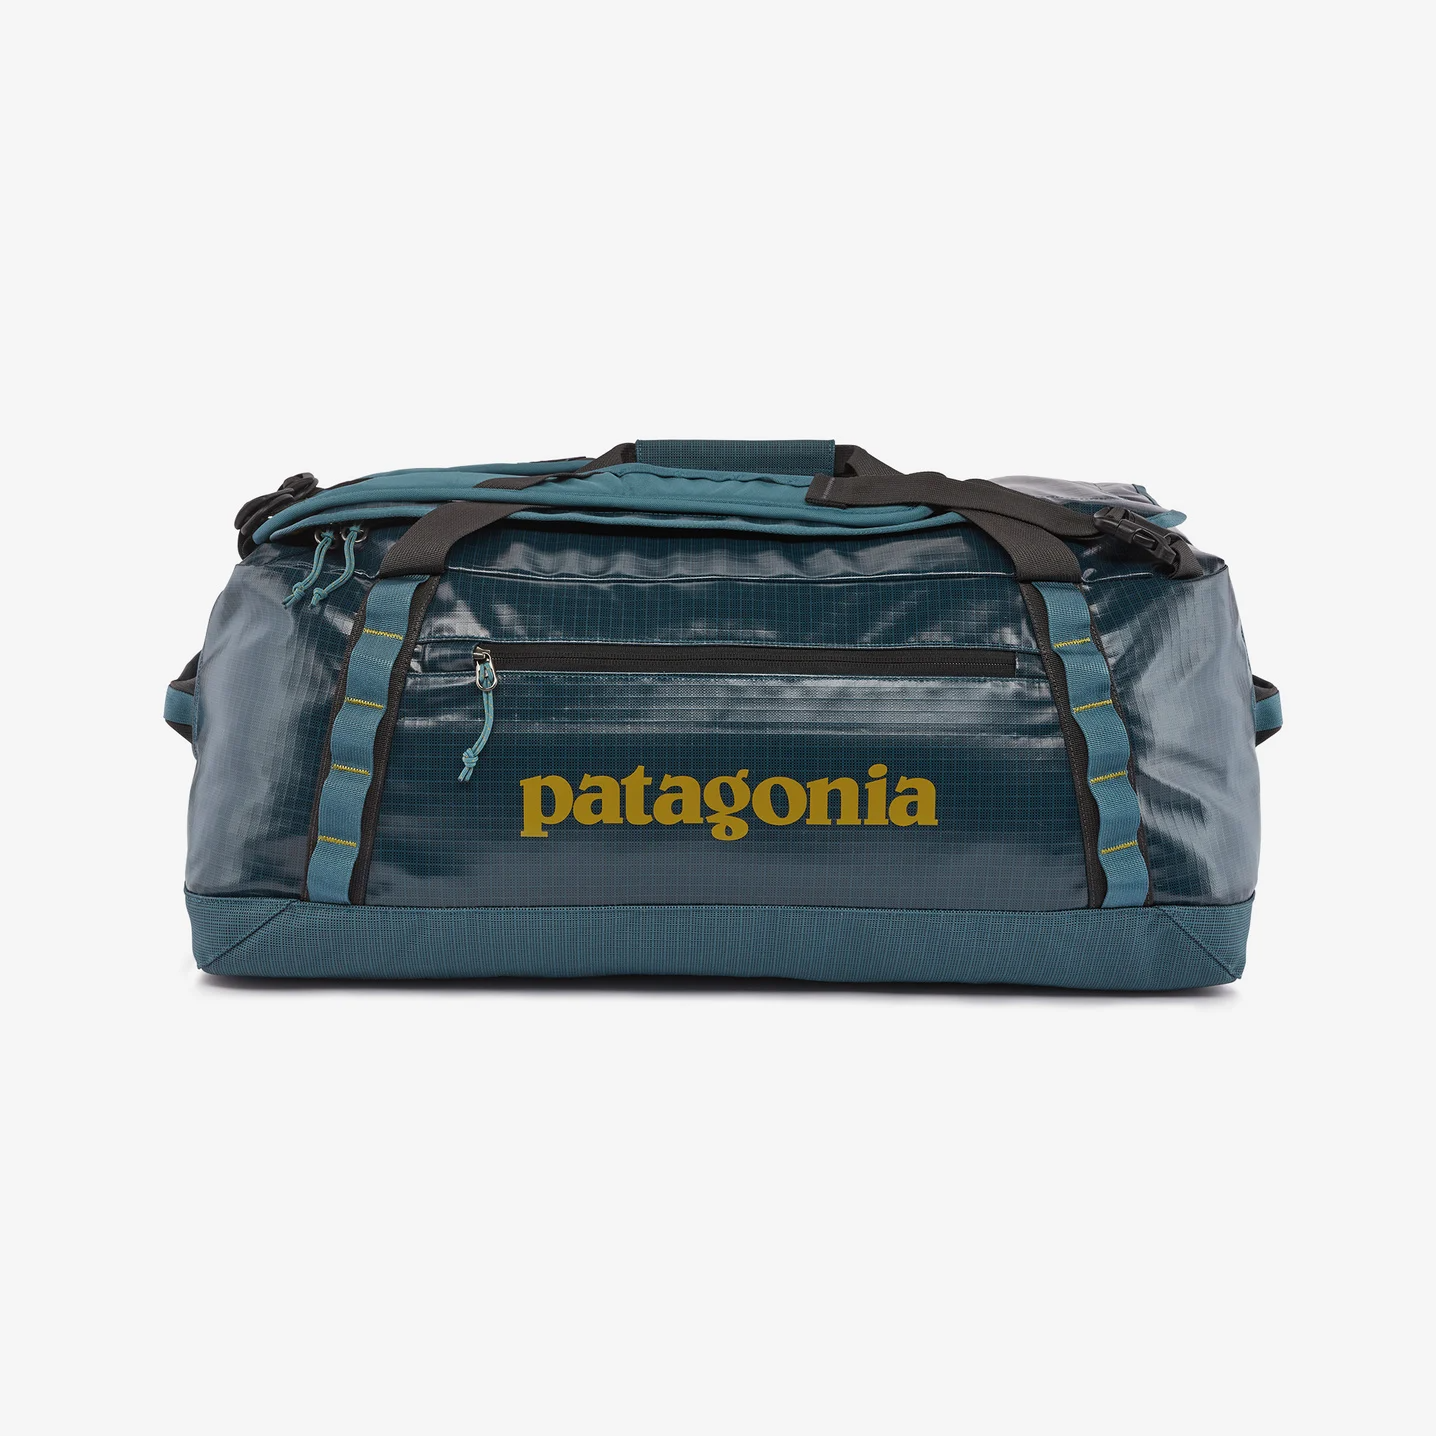 <p><strong>$169.00</strong></p><p><a href="https://go.redirectingat.com?id=74968X1553576&url=https%3A%2F%2Fwww.patagonia.com%2Fproduct%2Fblack-hole-duffel-bag-55-liters%2F49342.html&sref=https%3A%2F%2Fwww.harpersbazaar.com%2Ffashion%2Ftrends%2Fg44567633%2Fbest-travel-backpacks-for-women%2F">Shop Now</a></p><p>On outdoorsy weekends or low-key trips out of town, I swear by this Patagonia duffel. It has both backpack straps and a longer crossbody option, so you can wear it in whatever way is most comfortable. </p><p><strong>Materials:</strong> Recycled polyester ripstop</p><p><strong>Size:</strong> 55-liter capacity</p><p><strong>Color:</strong> Navy, belay blue, perennial purple, and more</p><p><strong>What reviewers are saying:</strong> “This bag comes in useful for every member of our family as we head out for weekends, plane trips, and camping.”</p>